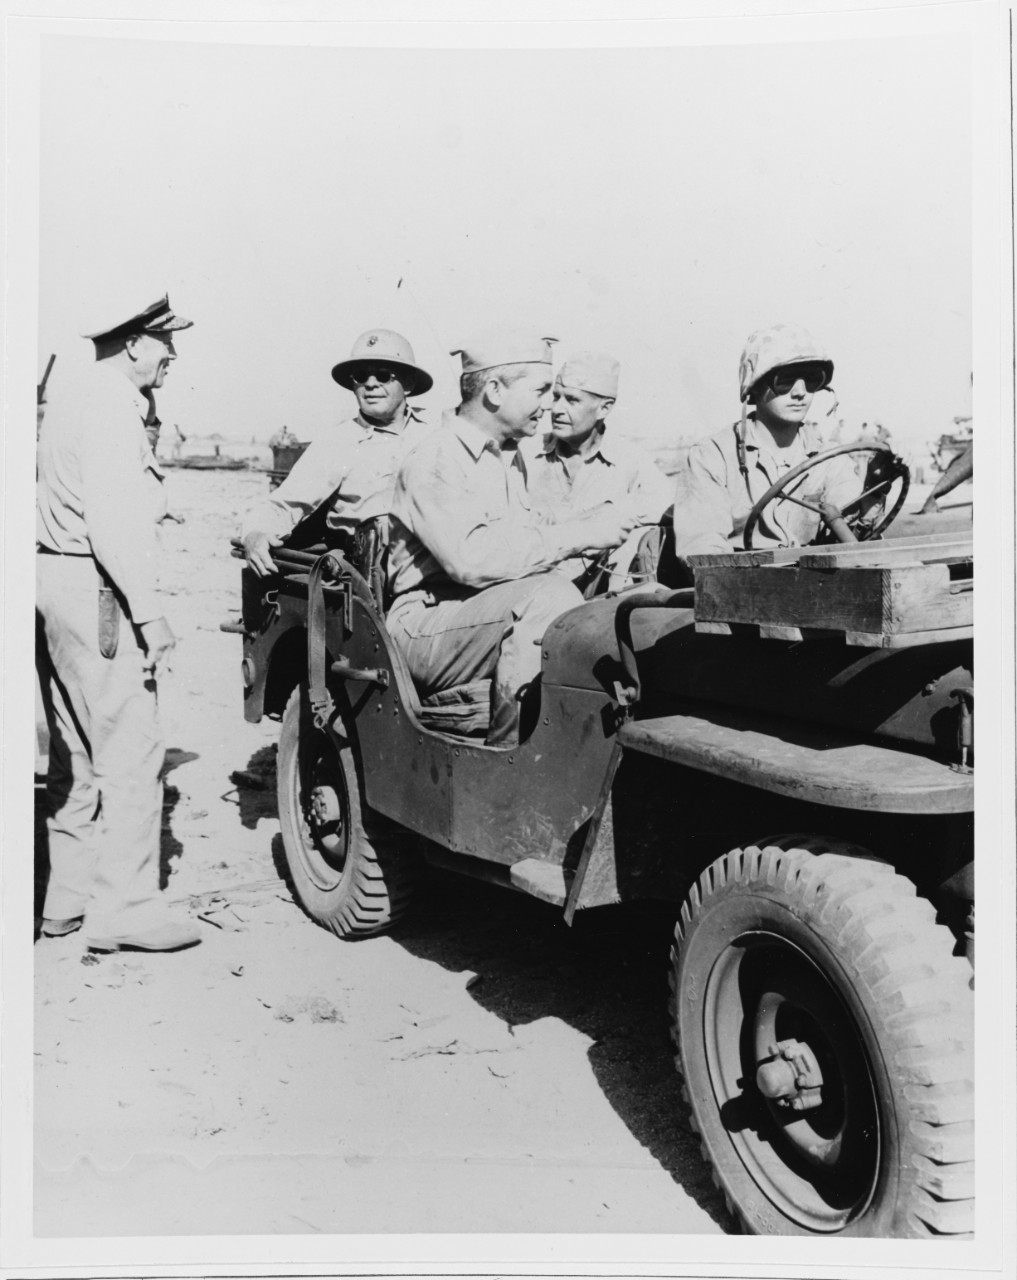 Secretary of the Navy James Forrestal and ADM R.A. Spruance (ComFifthFleet) ride in Jeep, Marshall Islands, 2 Feb. 1944